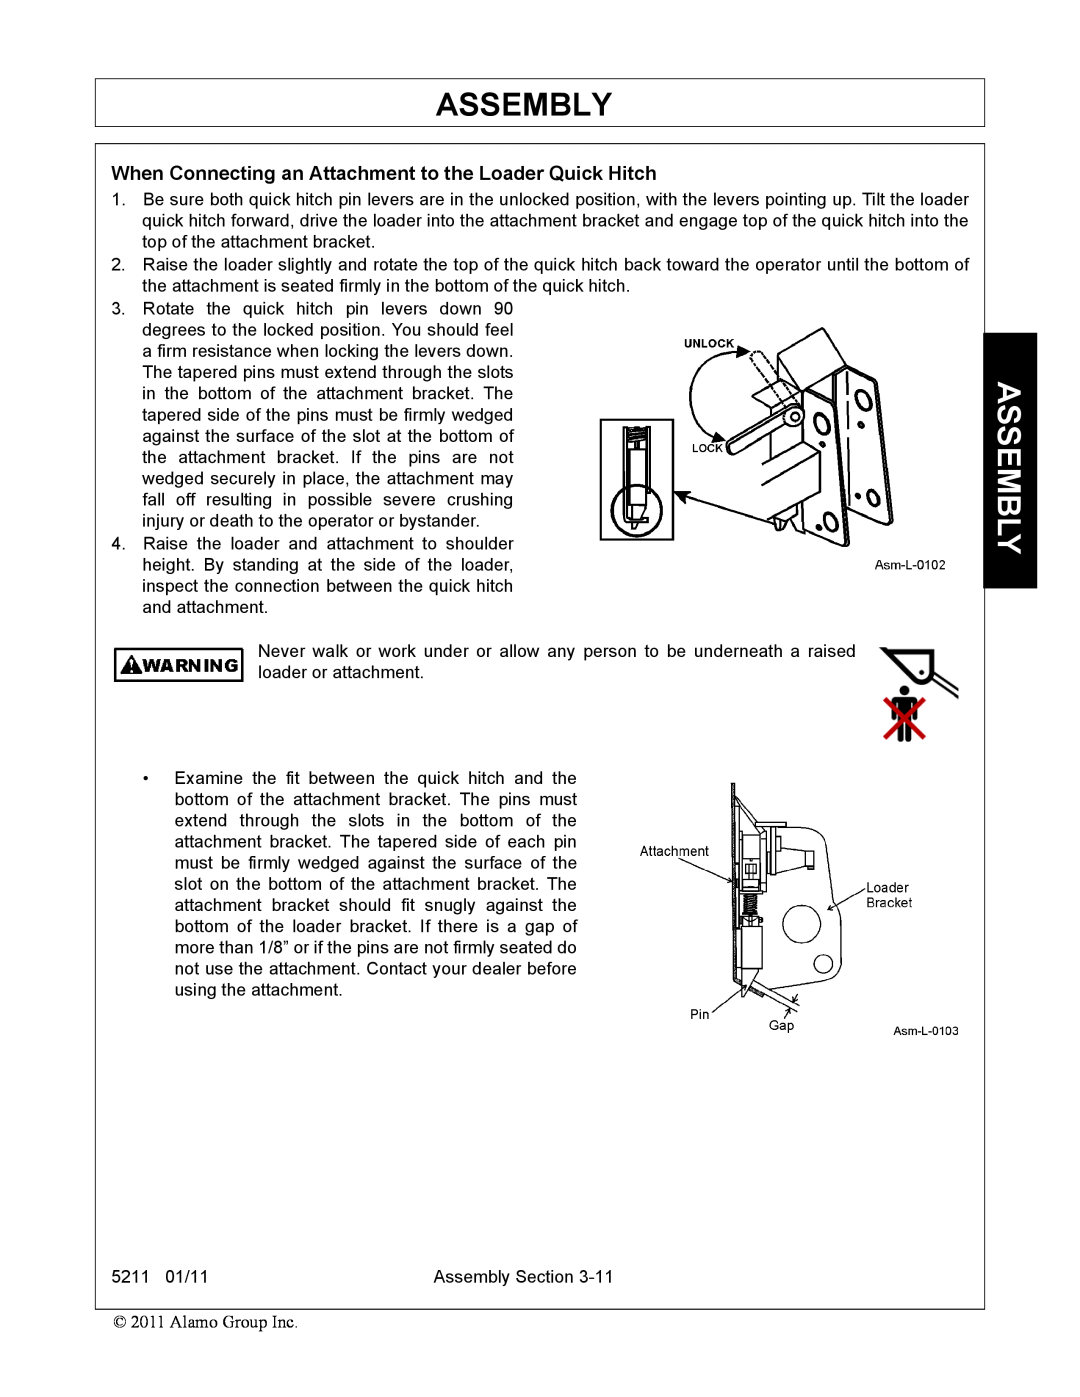 Servis-Rhino 5211 manual Assembly, When Connecting an Attachment to the Loader Quick Hitch 